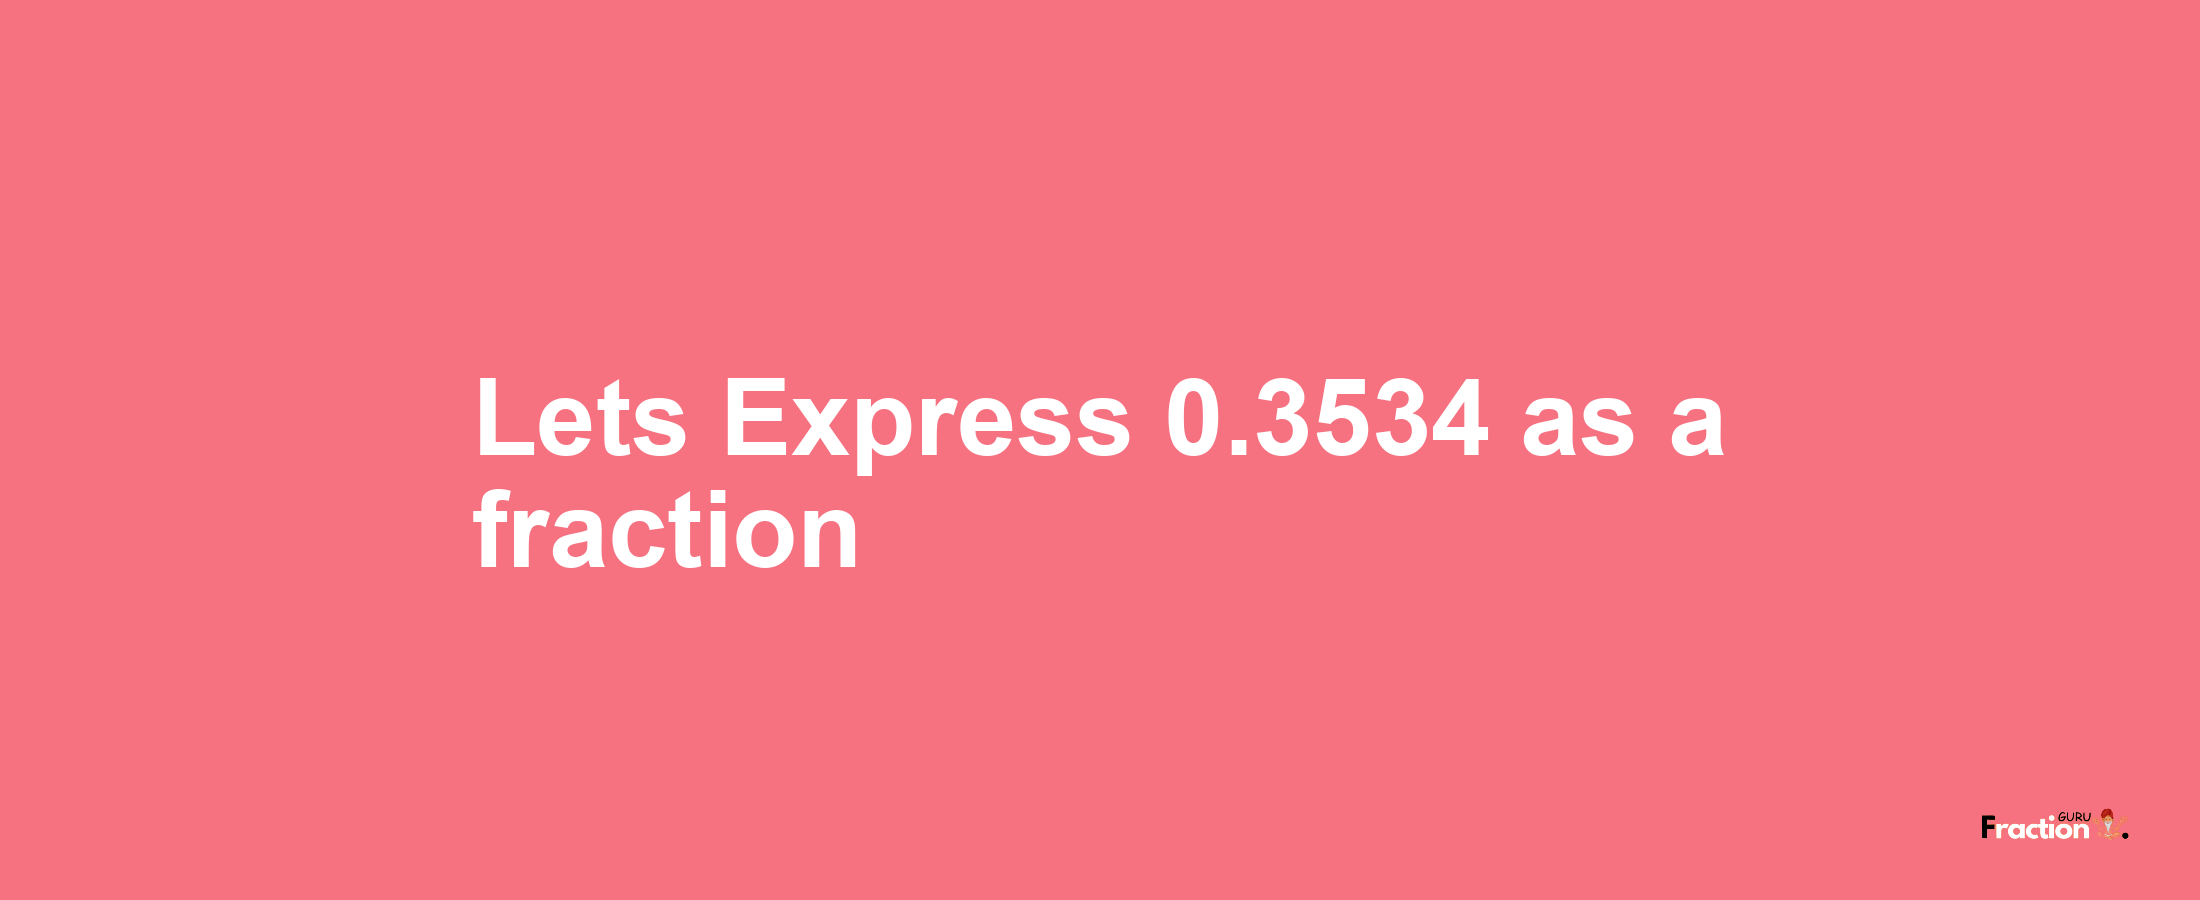 Lets Express 0.3534 as afraction